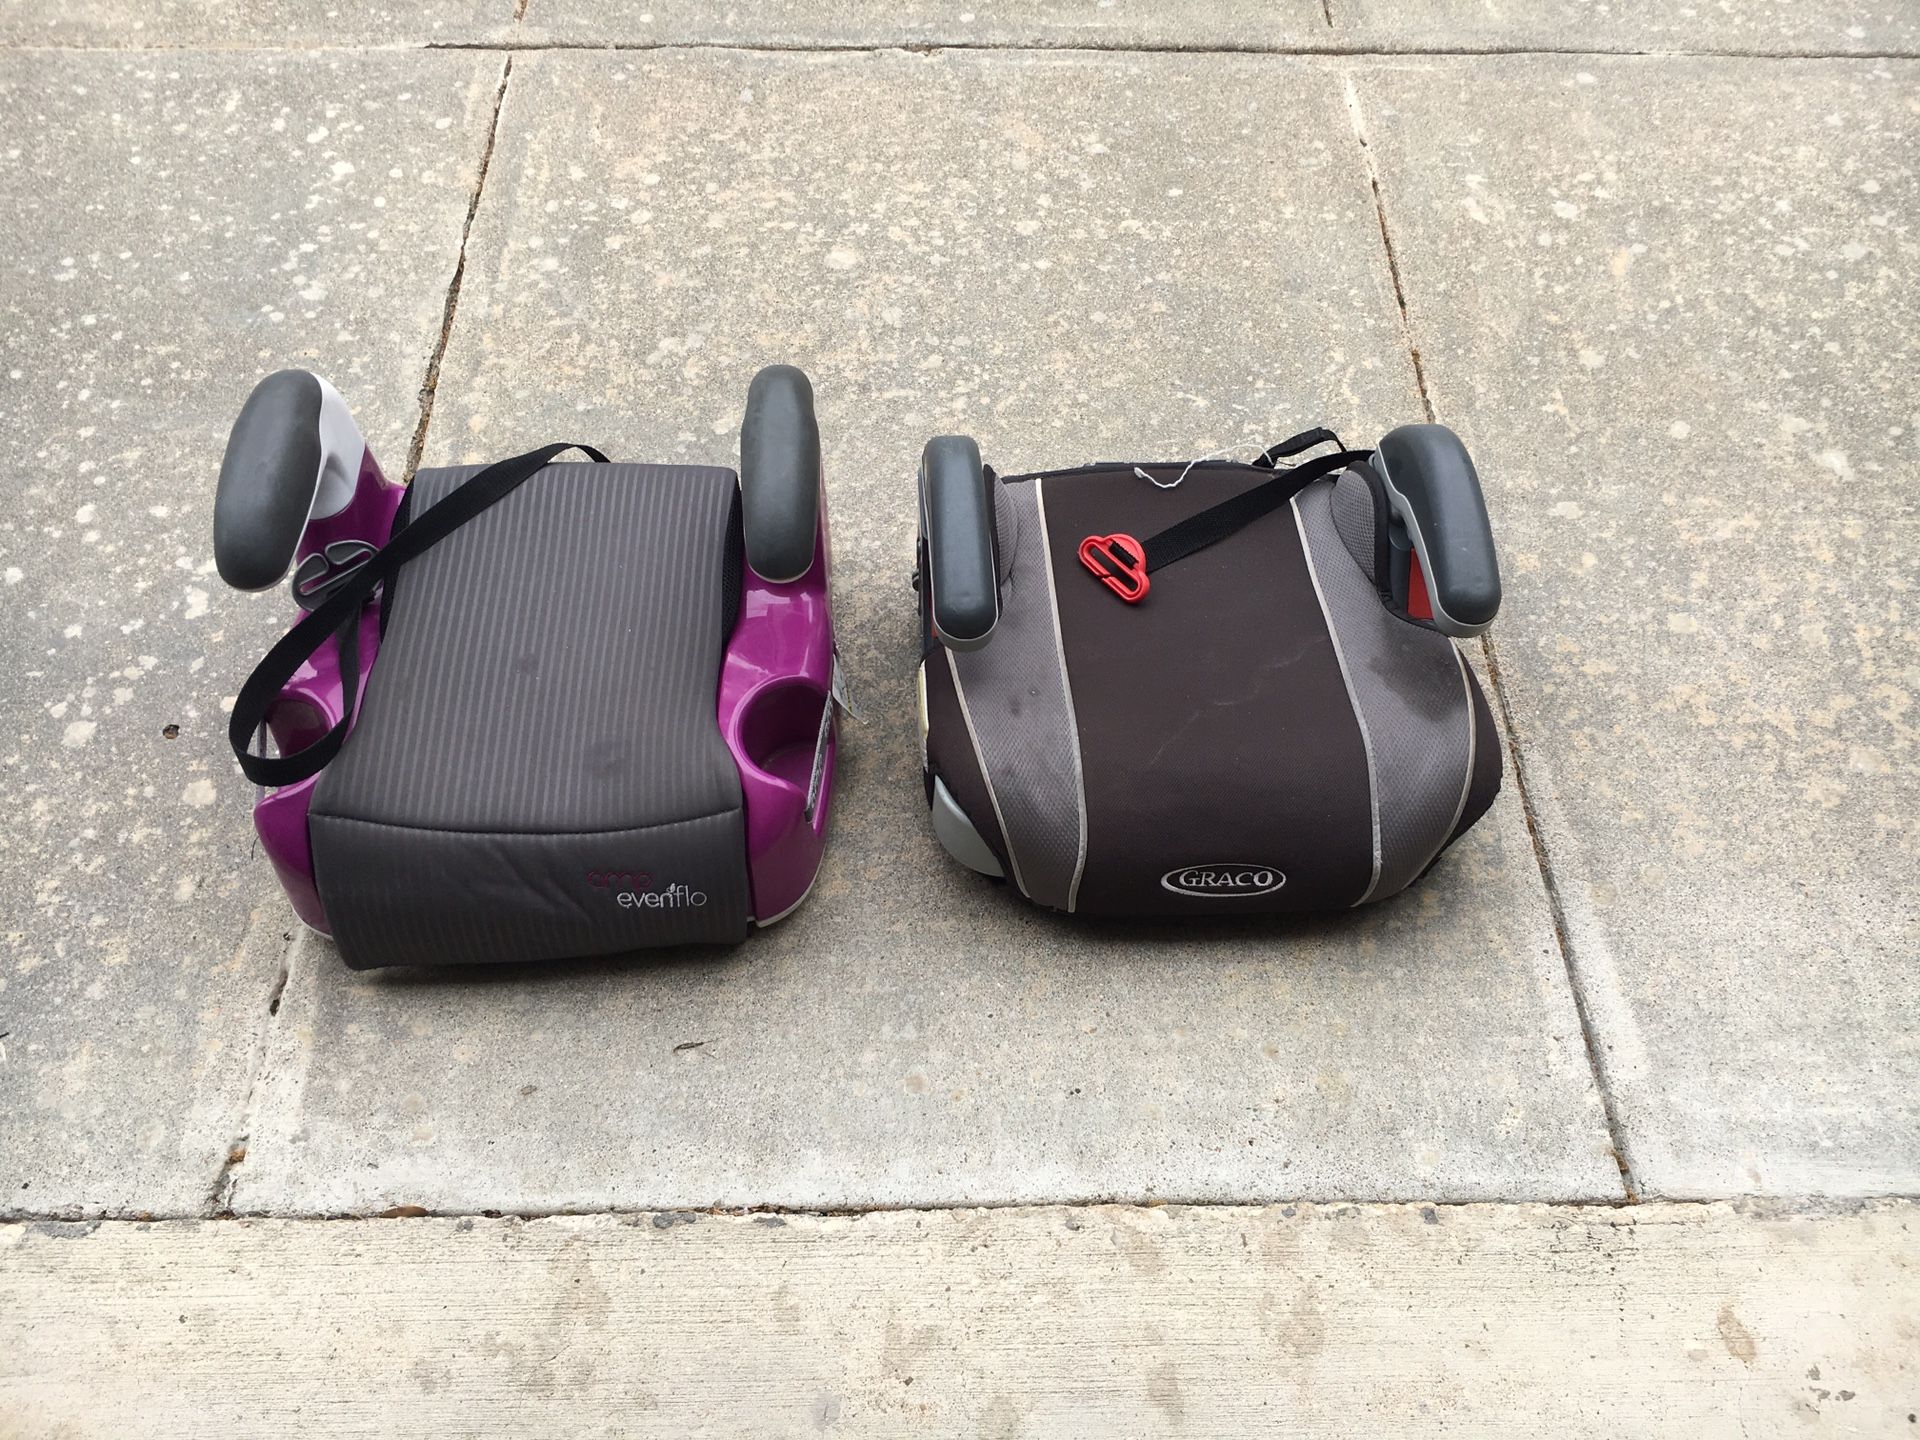 Moving sale: Free! 2 booster car seats.